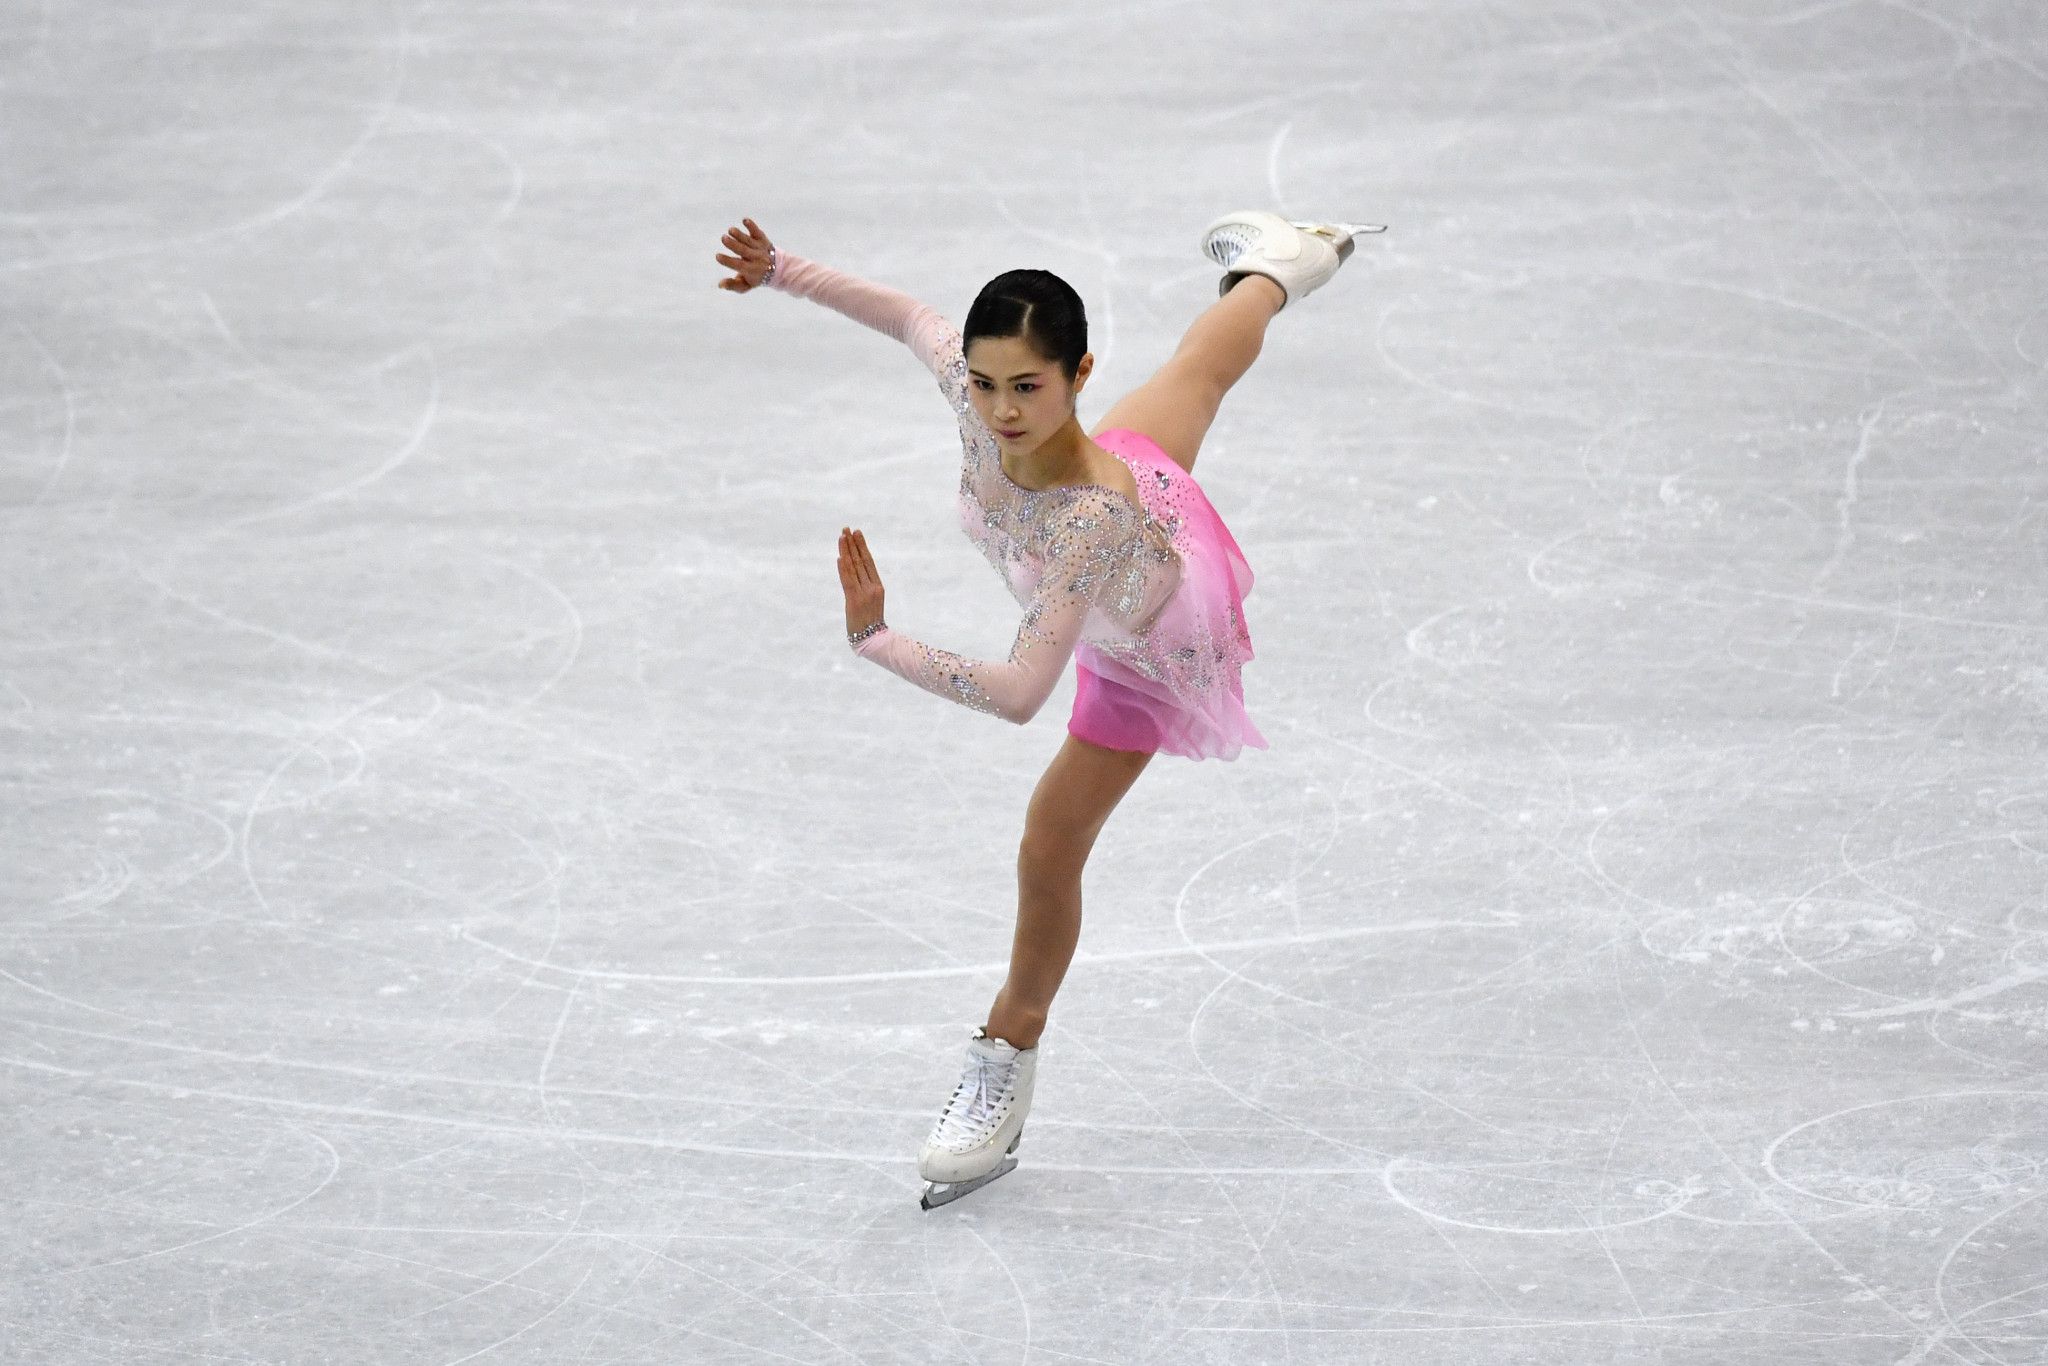 Miyahara triumphs on opening day of ISU Four Continents Figure Skating Championships